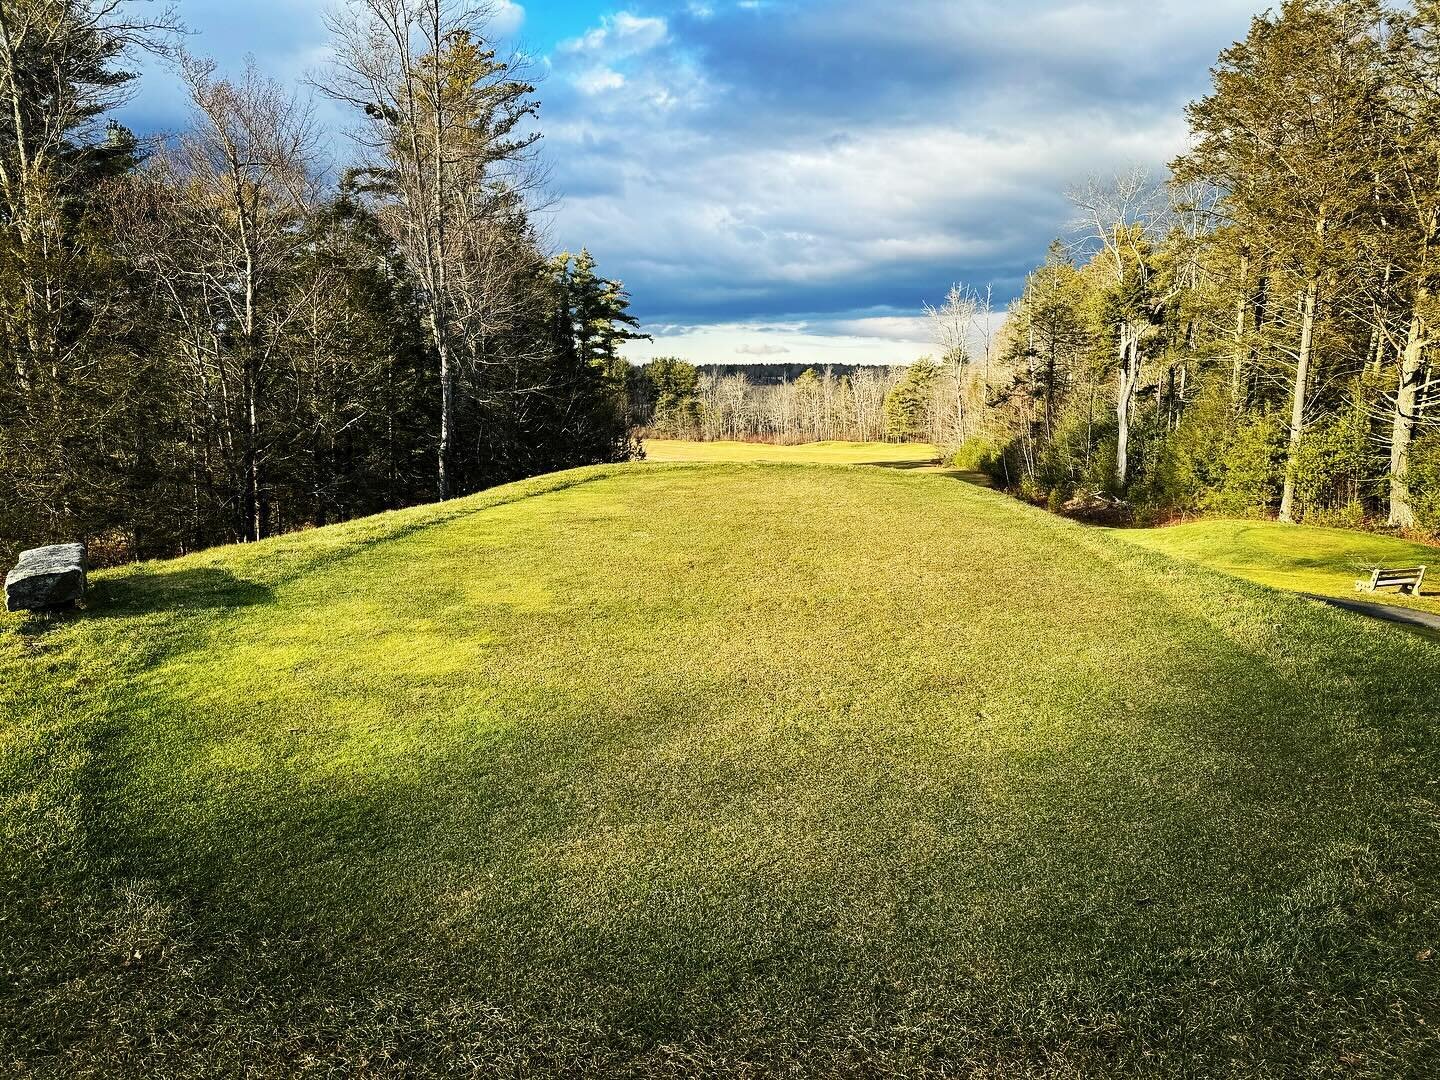 #3 tee looking mighty fine during this mild winter so far&hellip;we&rsquo;ll take it! #mainegolf #shipcity #teeboxinjanuary #teeithigh